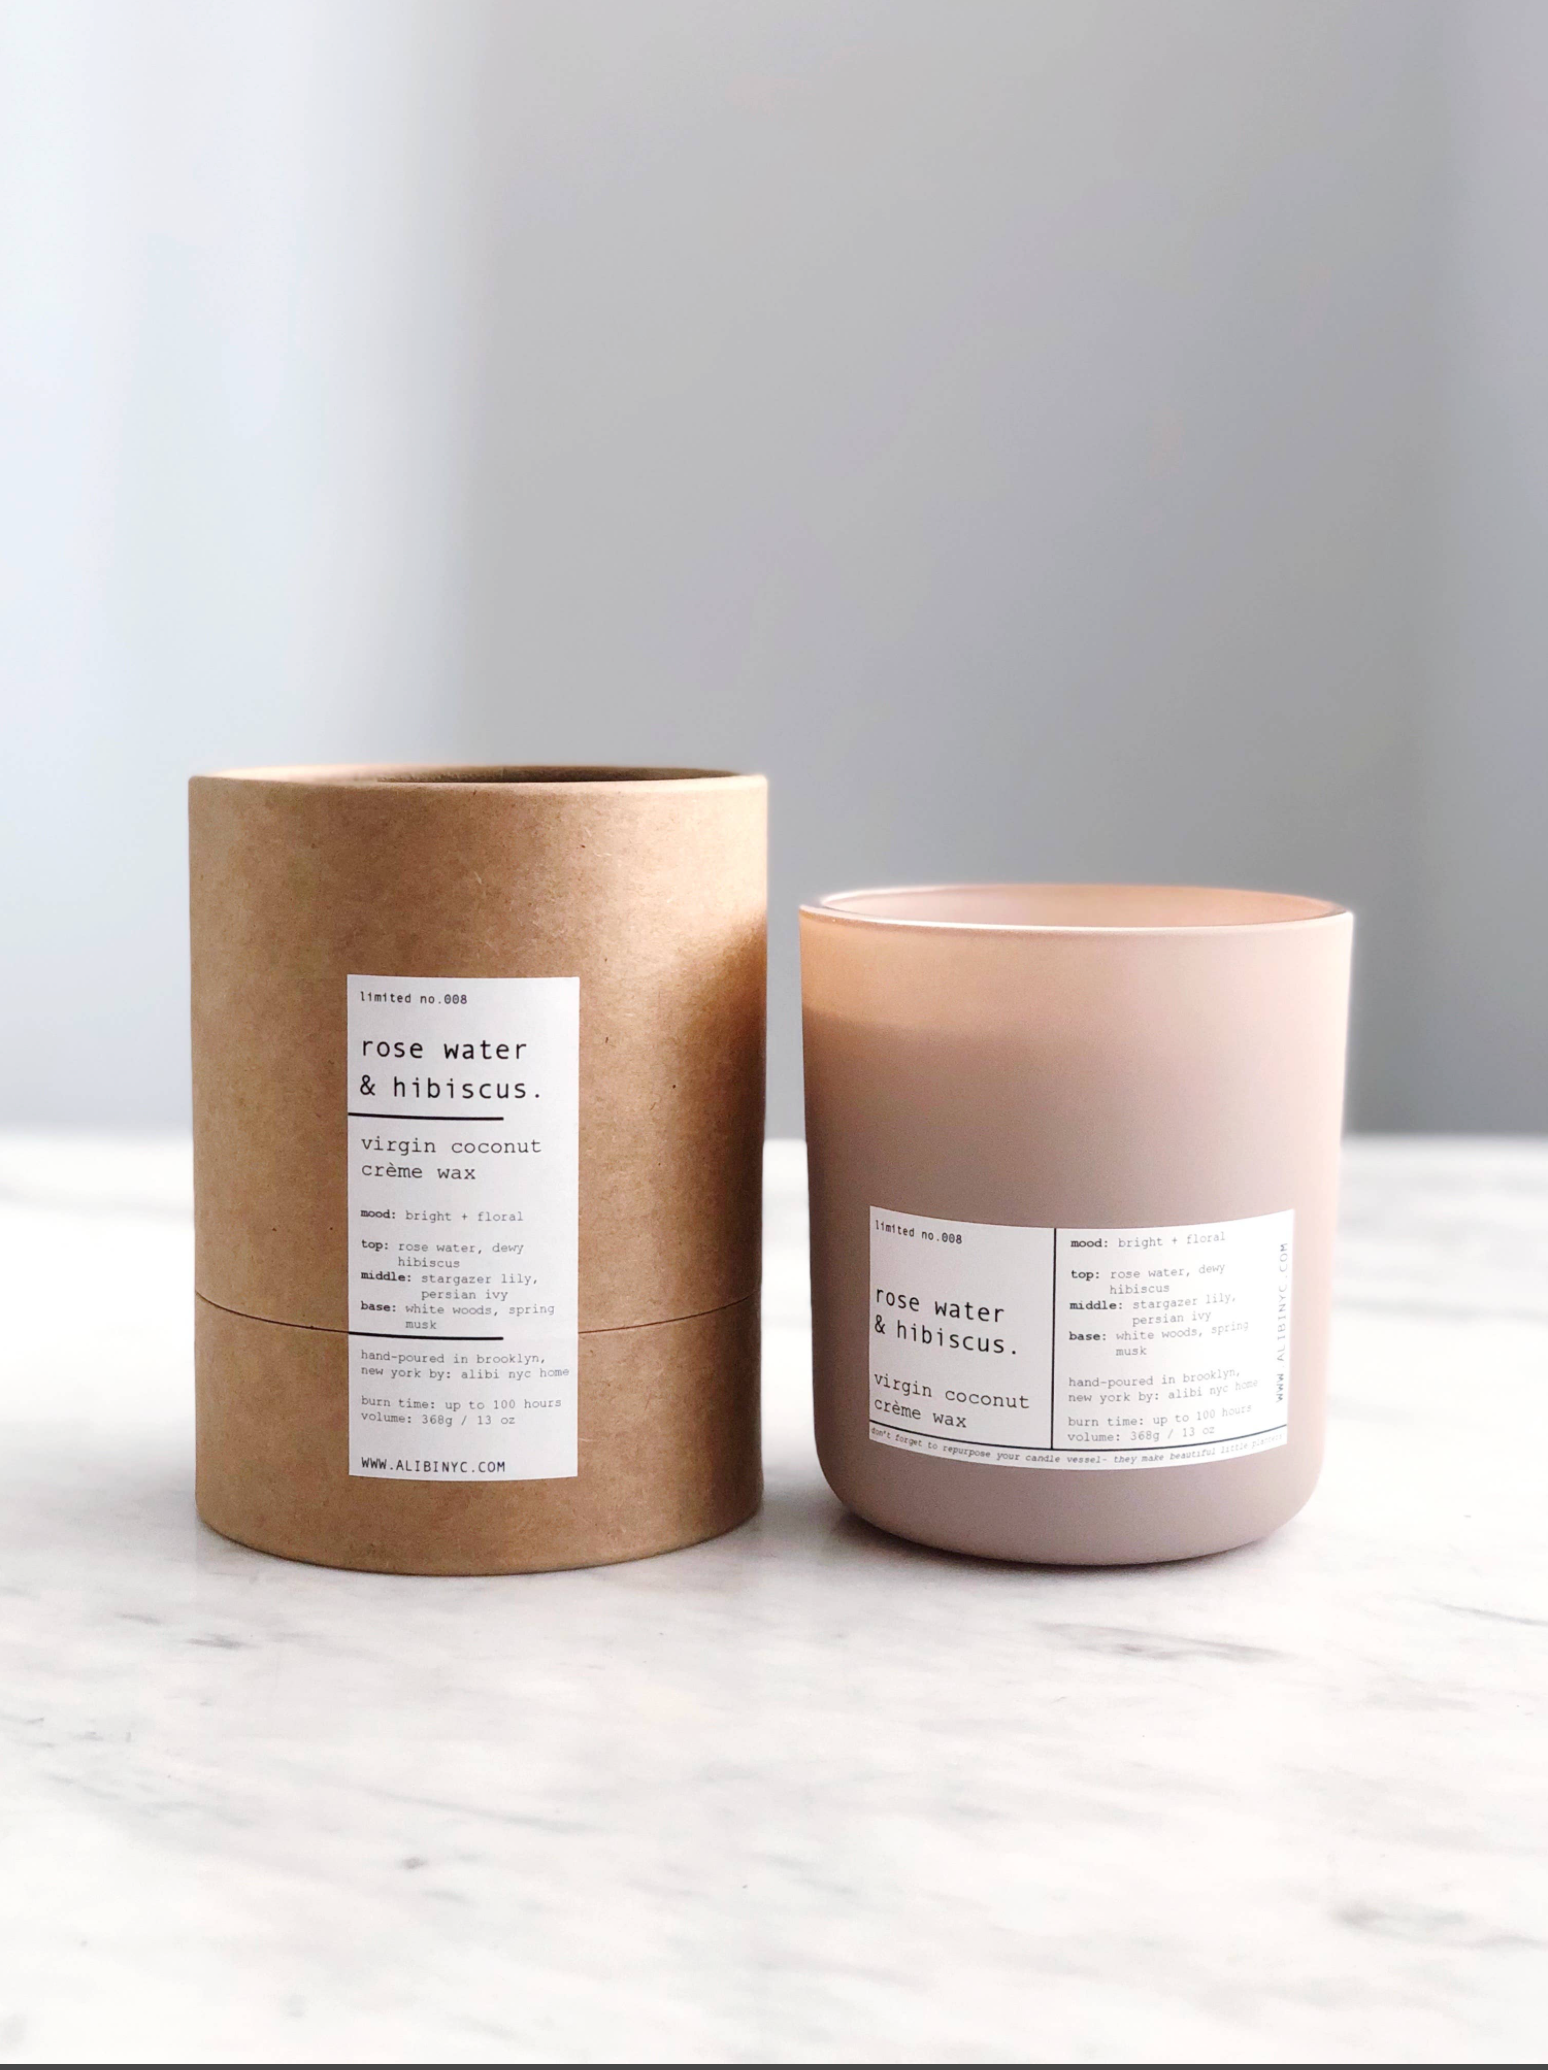 ROSE WATER & HIBISCUS | VIRGIN COCONUT CRÈME CANDLE